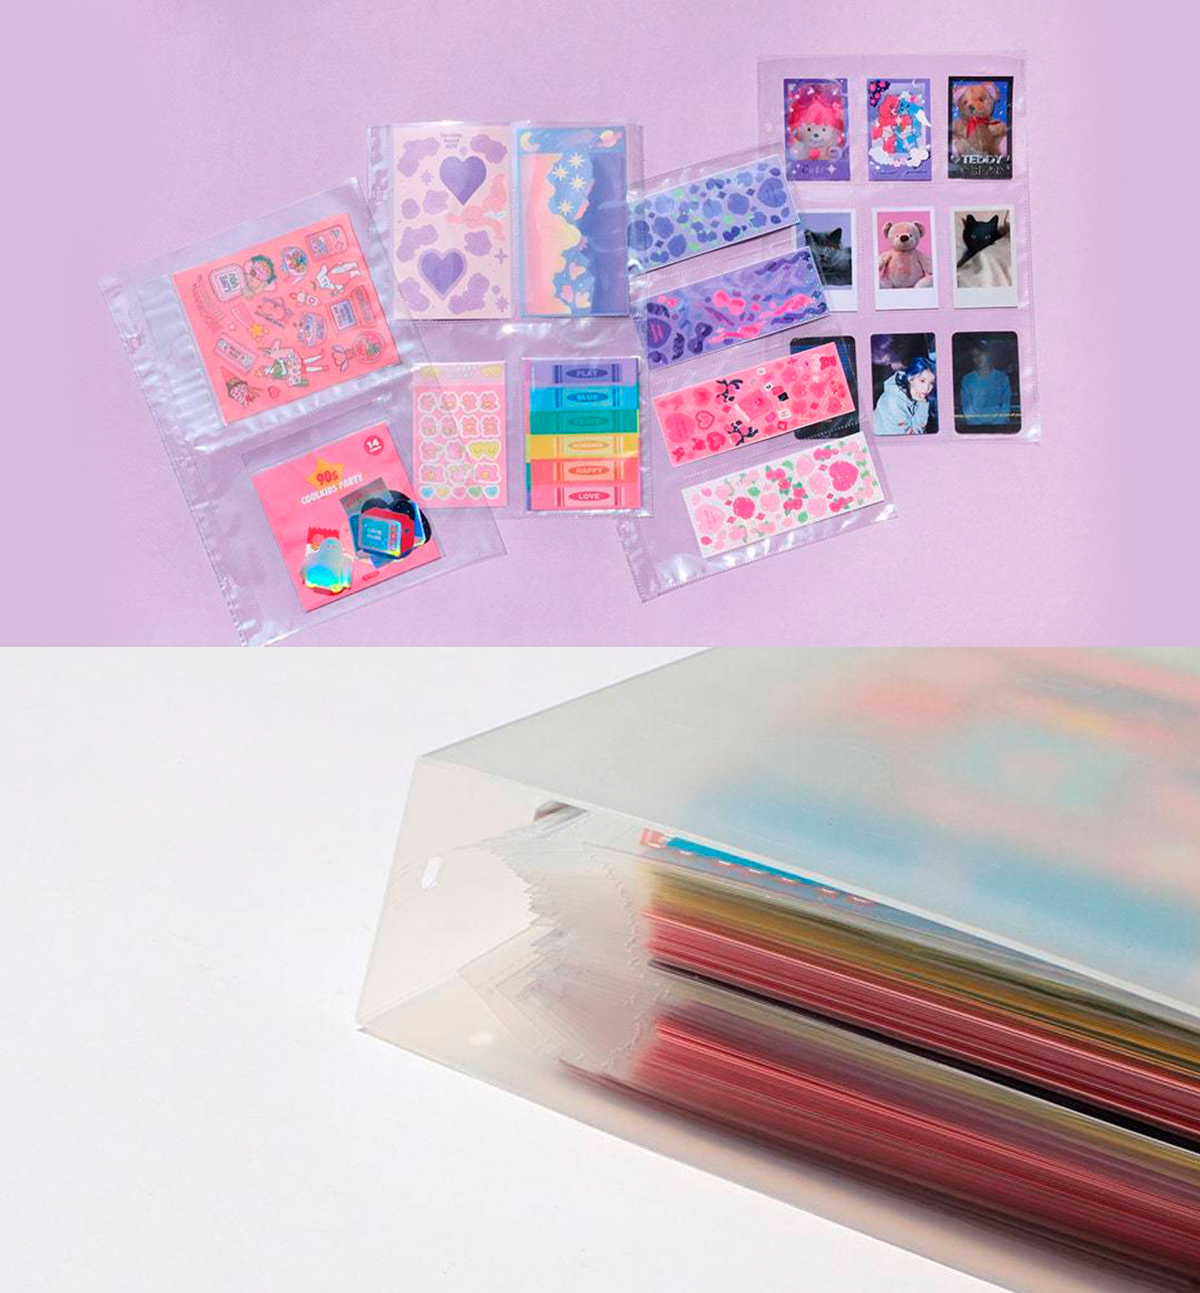 A4 Big Deco Pocket File [Double-Sided]